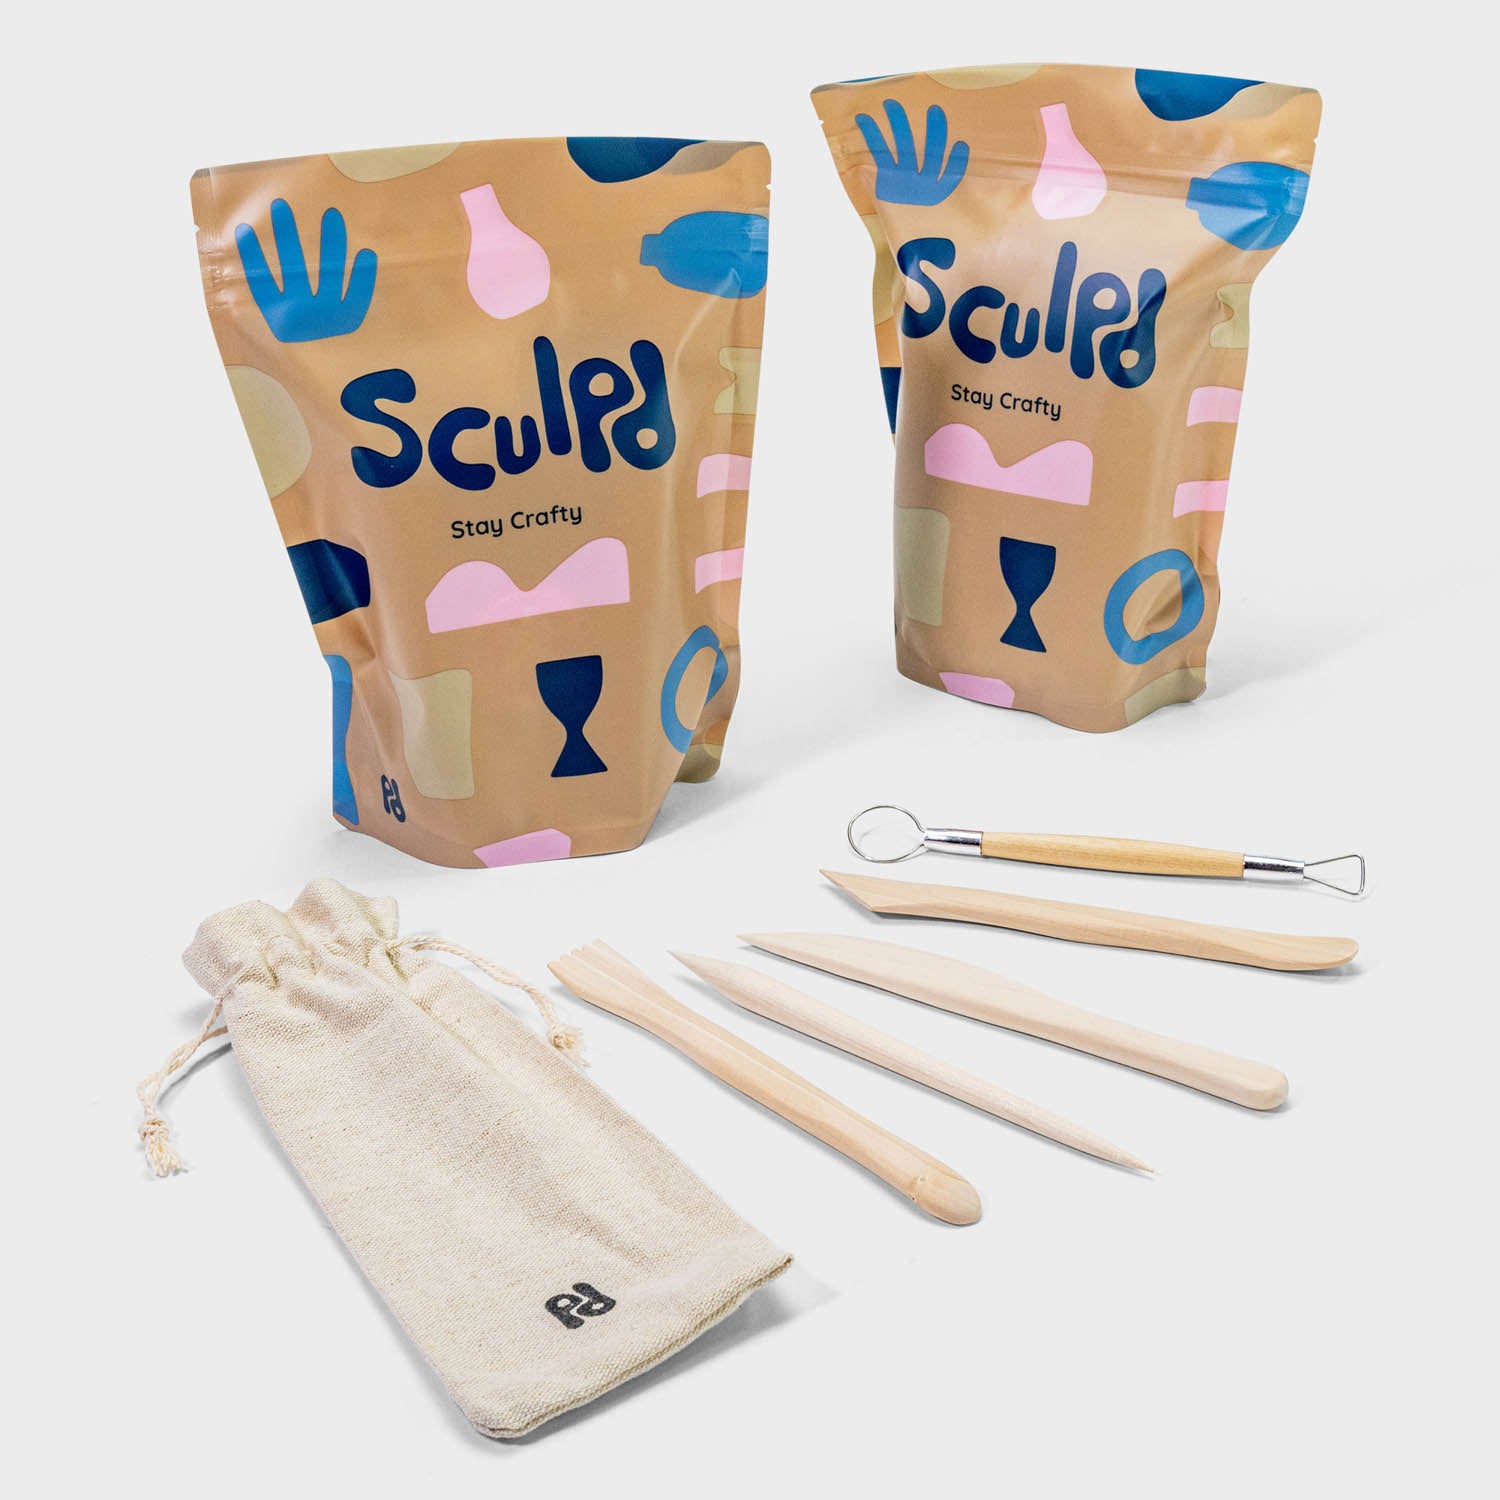 Sculpd Pottery Kit | The Original Air Dry Clay Starter Kit